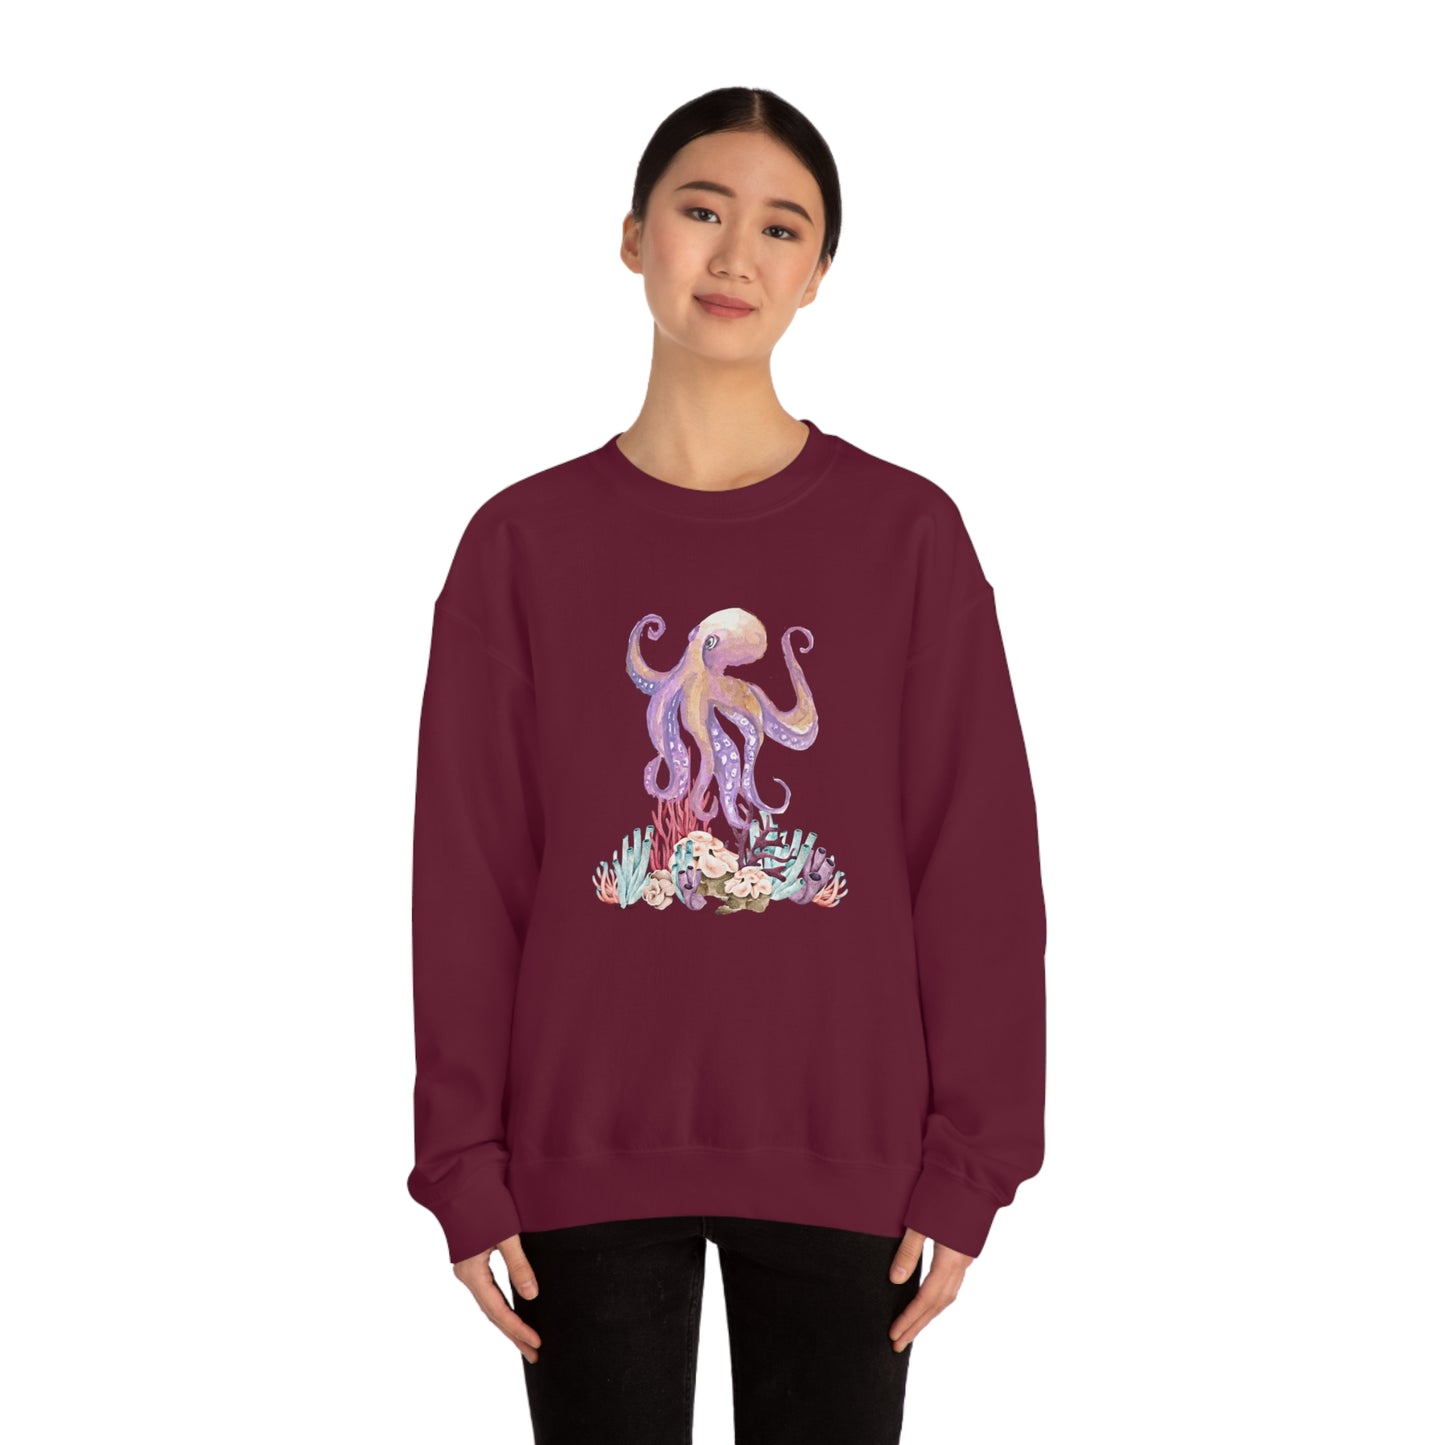 Mock up of a slender woman wearing the Maroon shirt